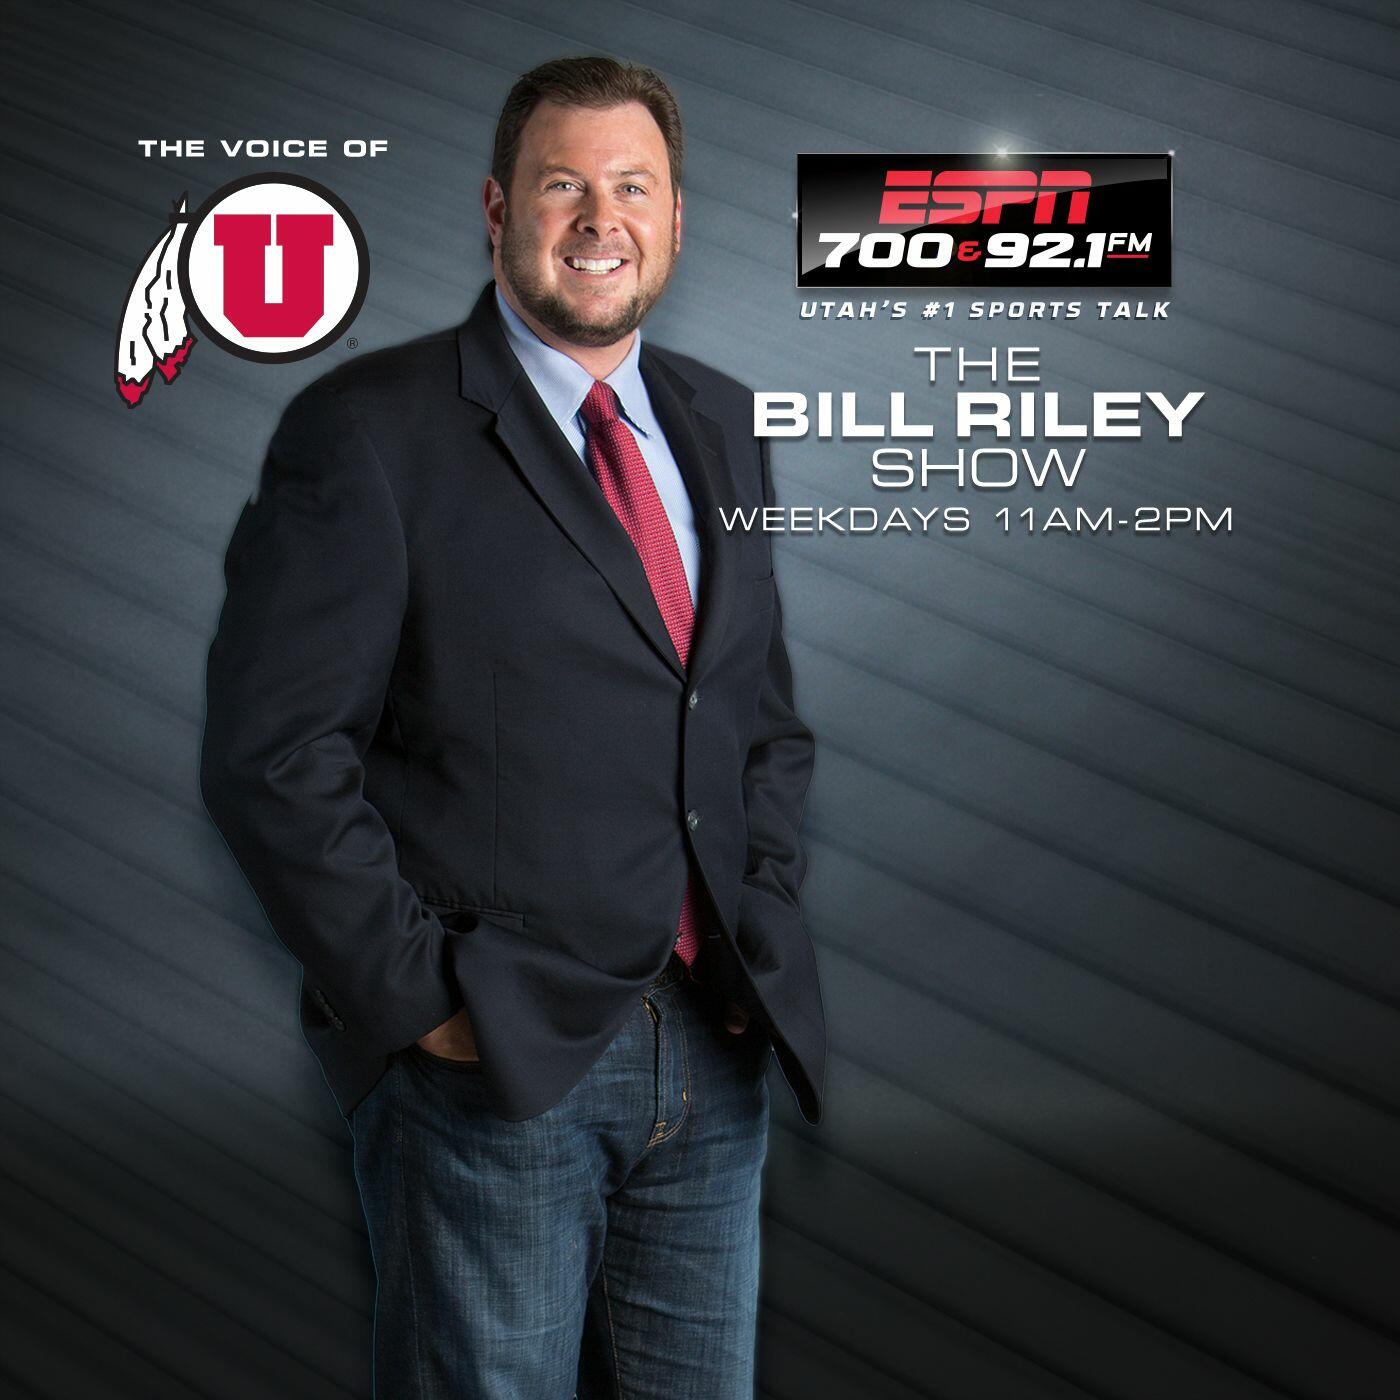 ♫ The Bill Riley Show  Hosted by Bill Riley and Produced by